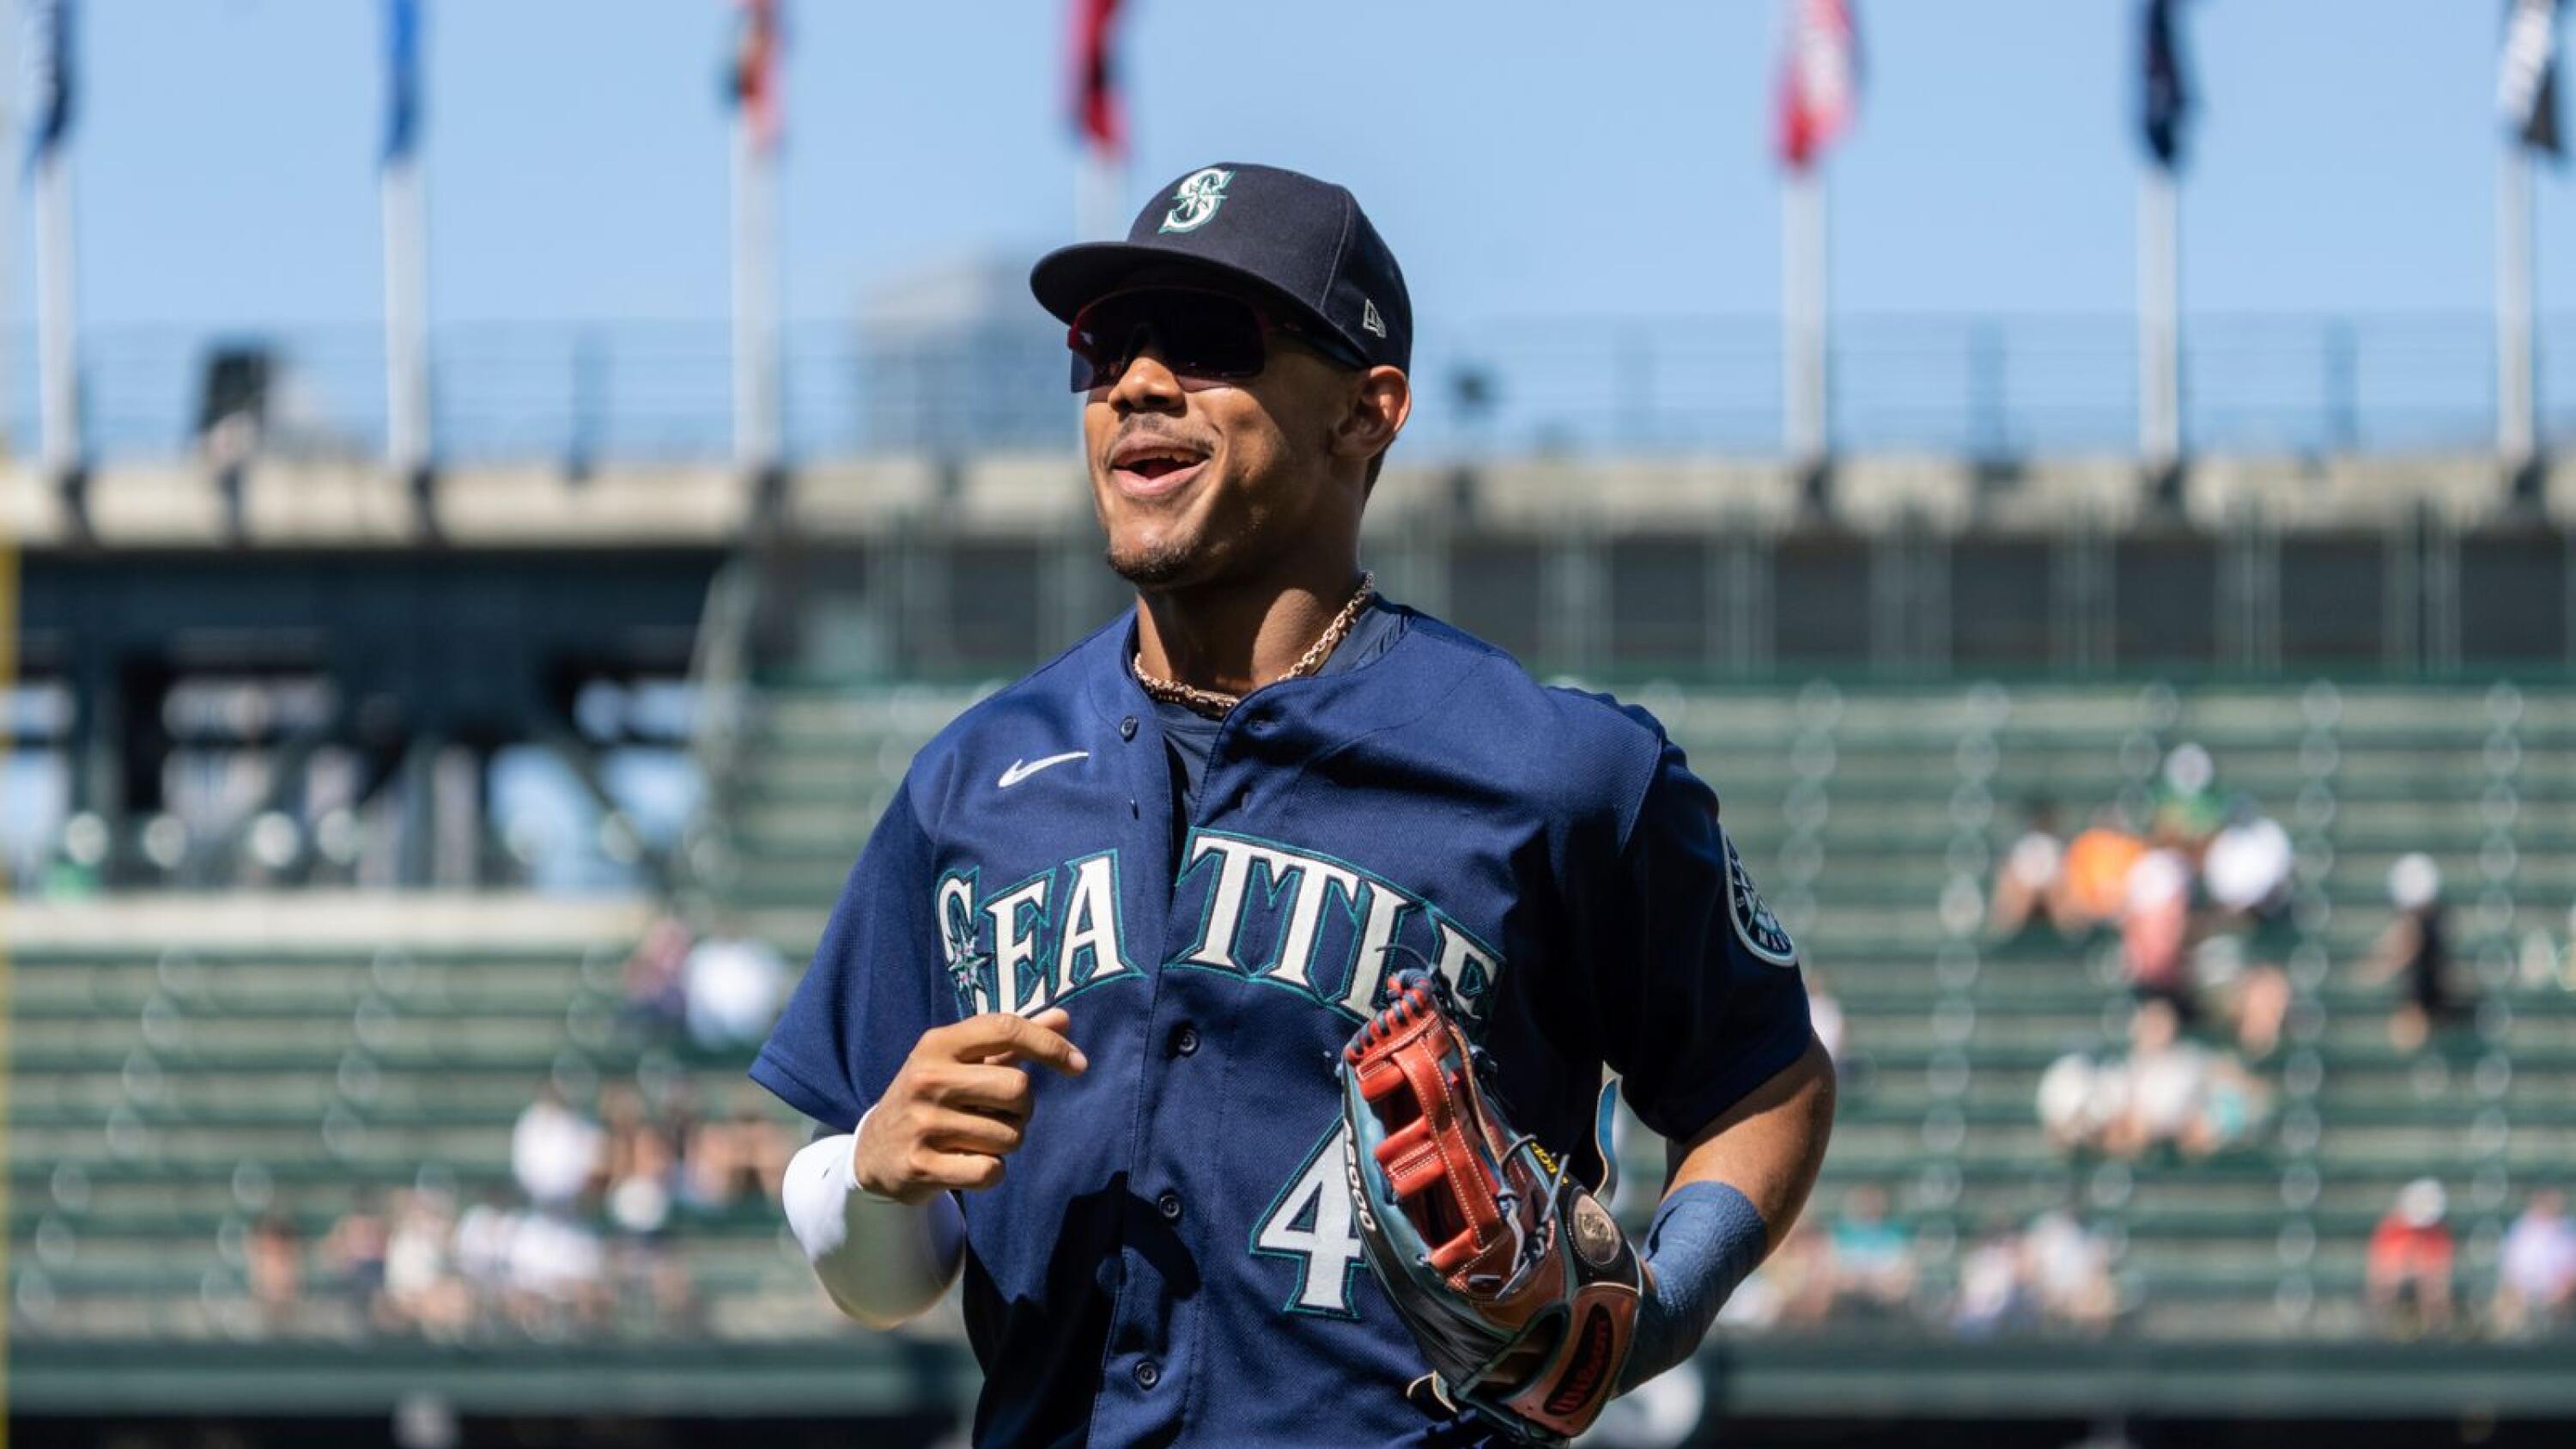 Mariners Star Julio Rodriguez Looks Forward To All-Star Game In